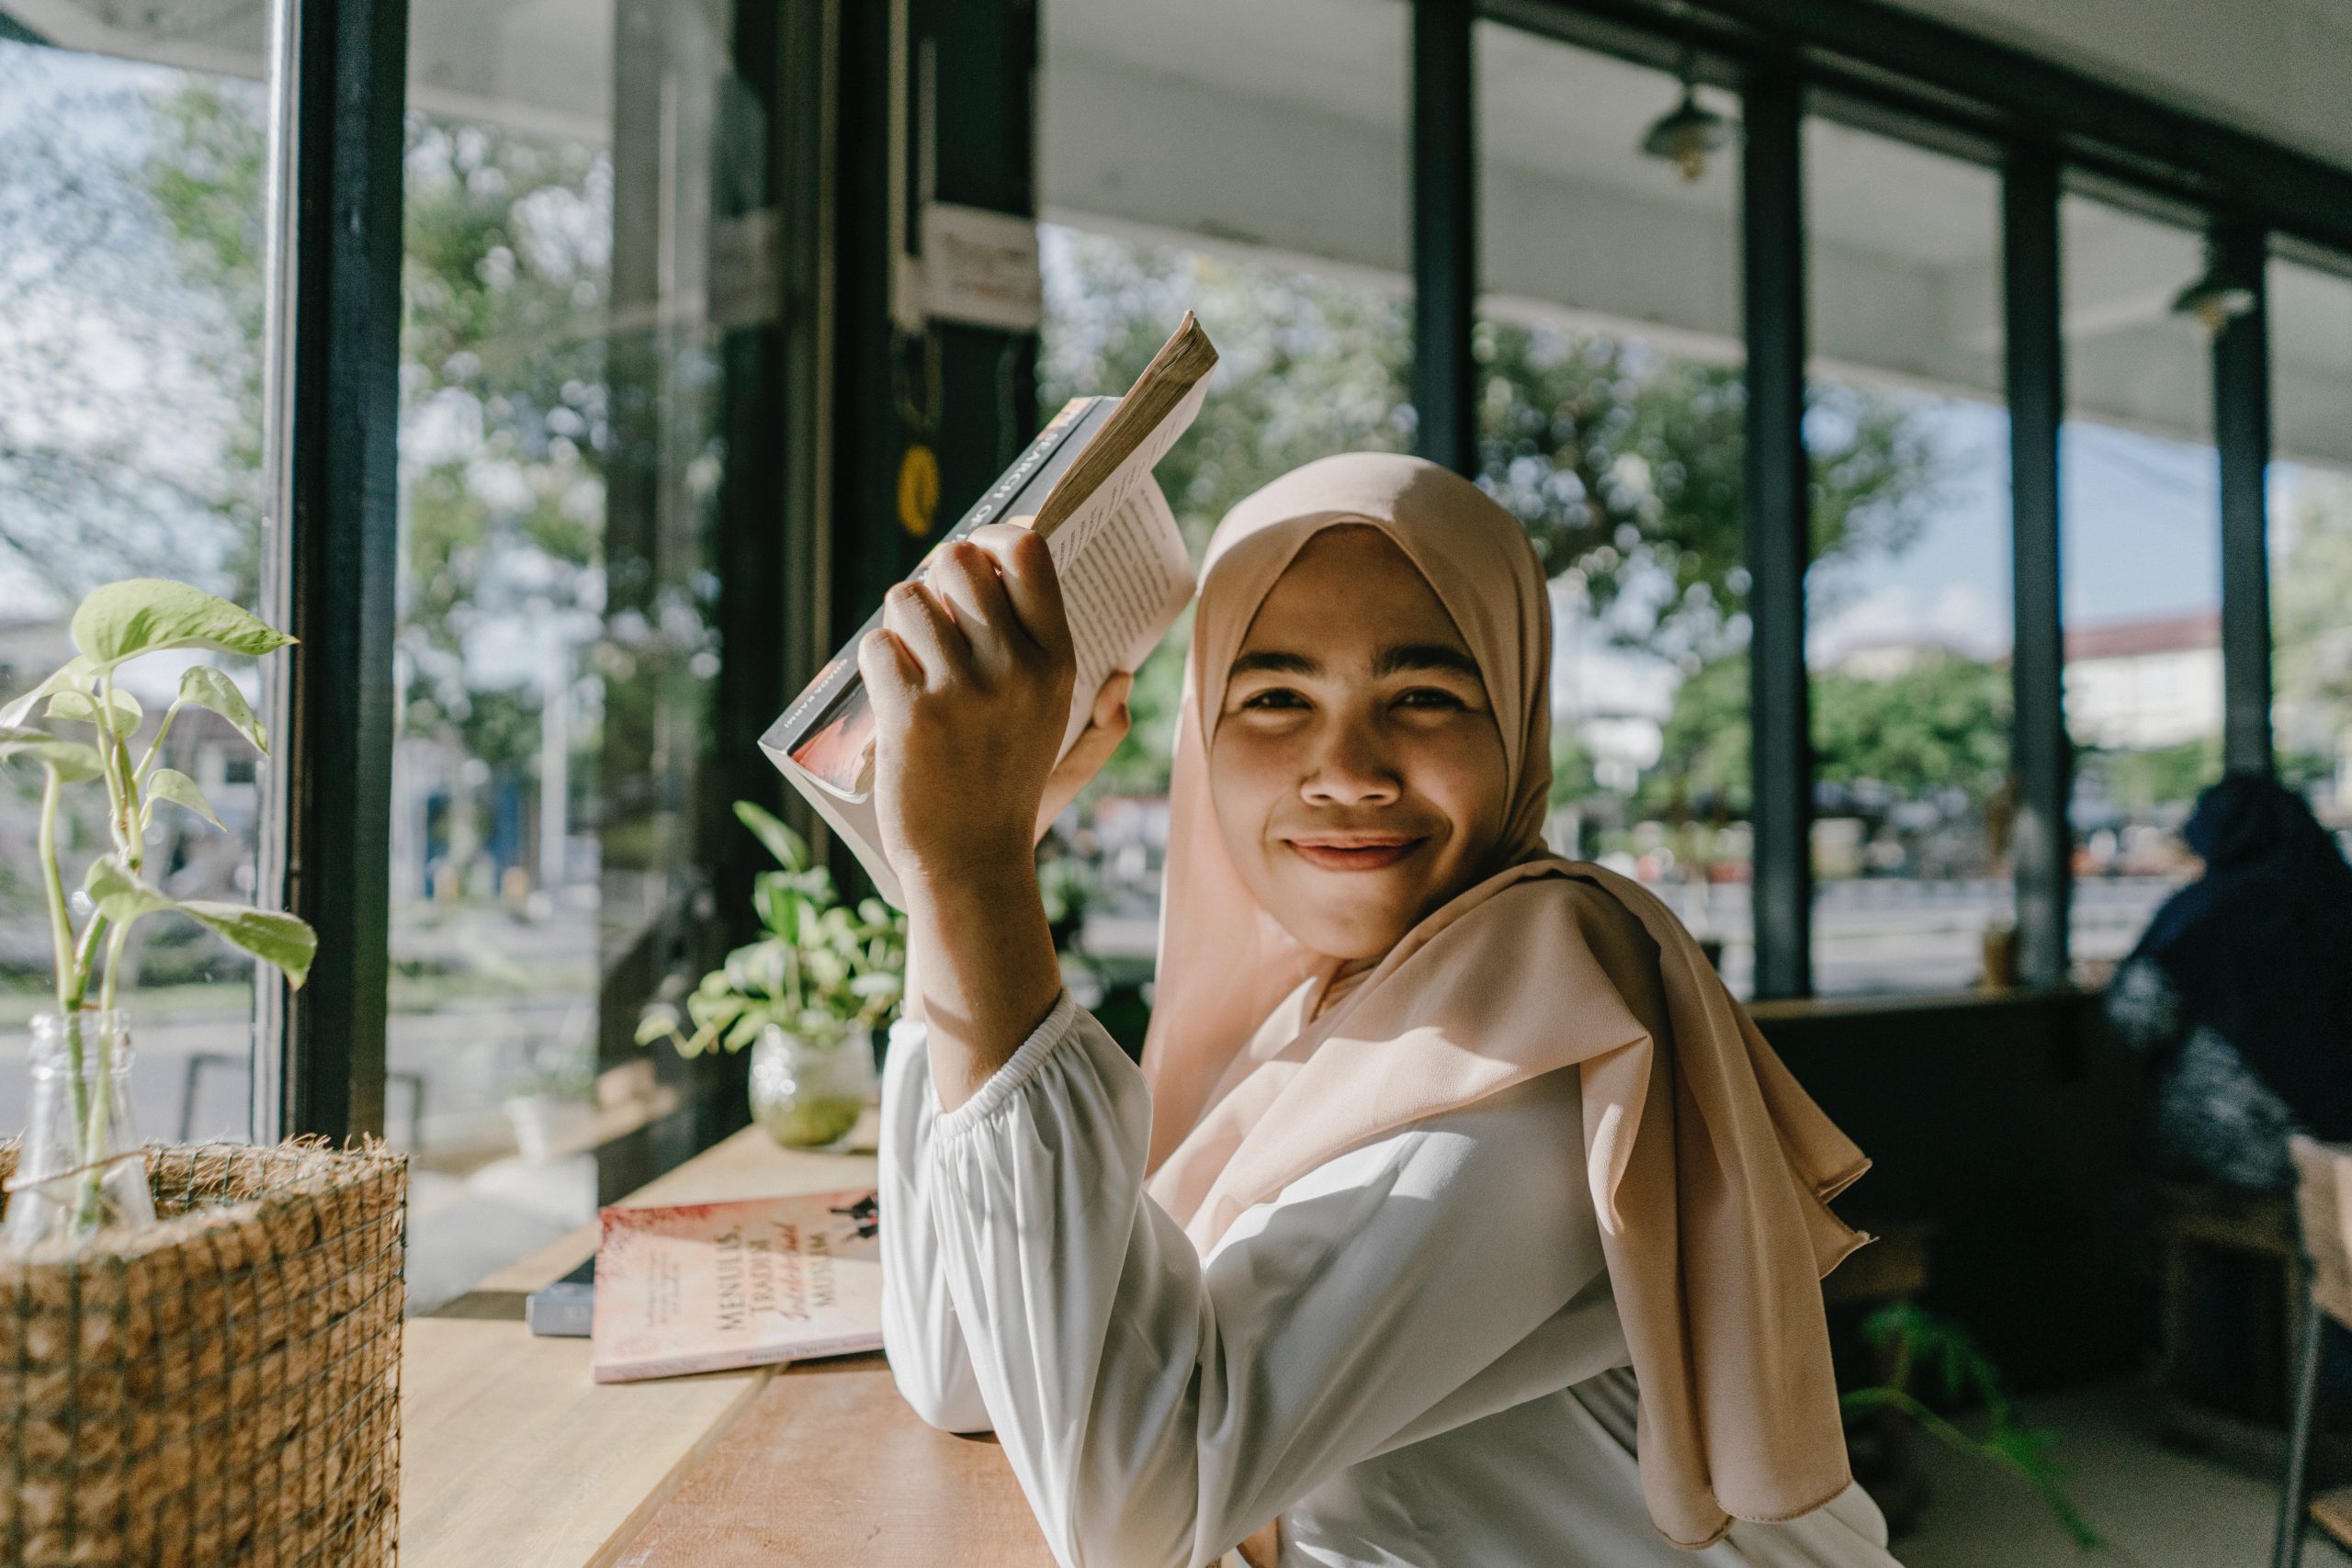 In an article on young muslims in books, an image shows a muslim woman reading in a coffee shop